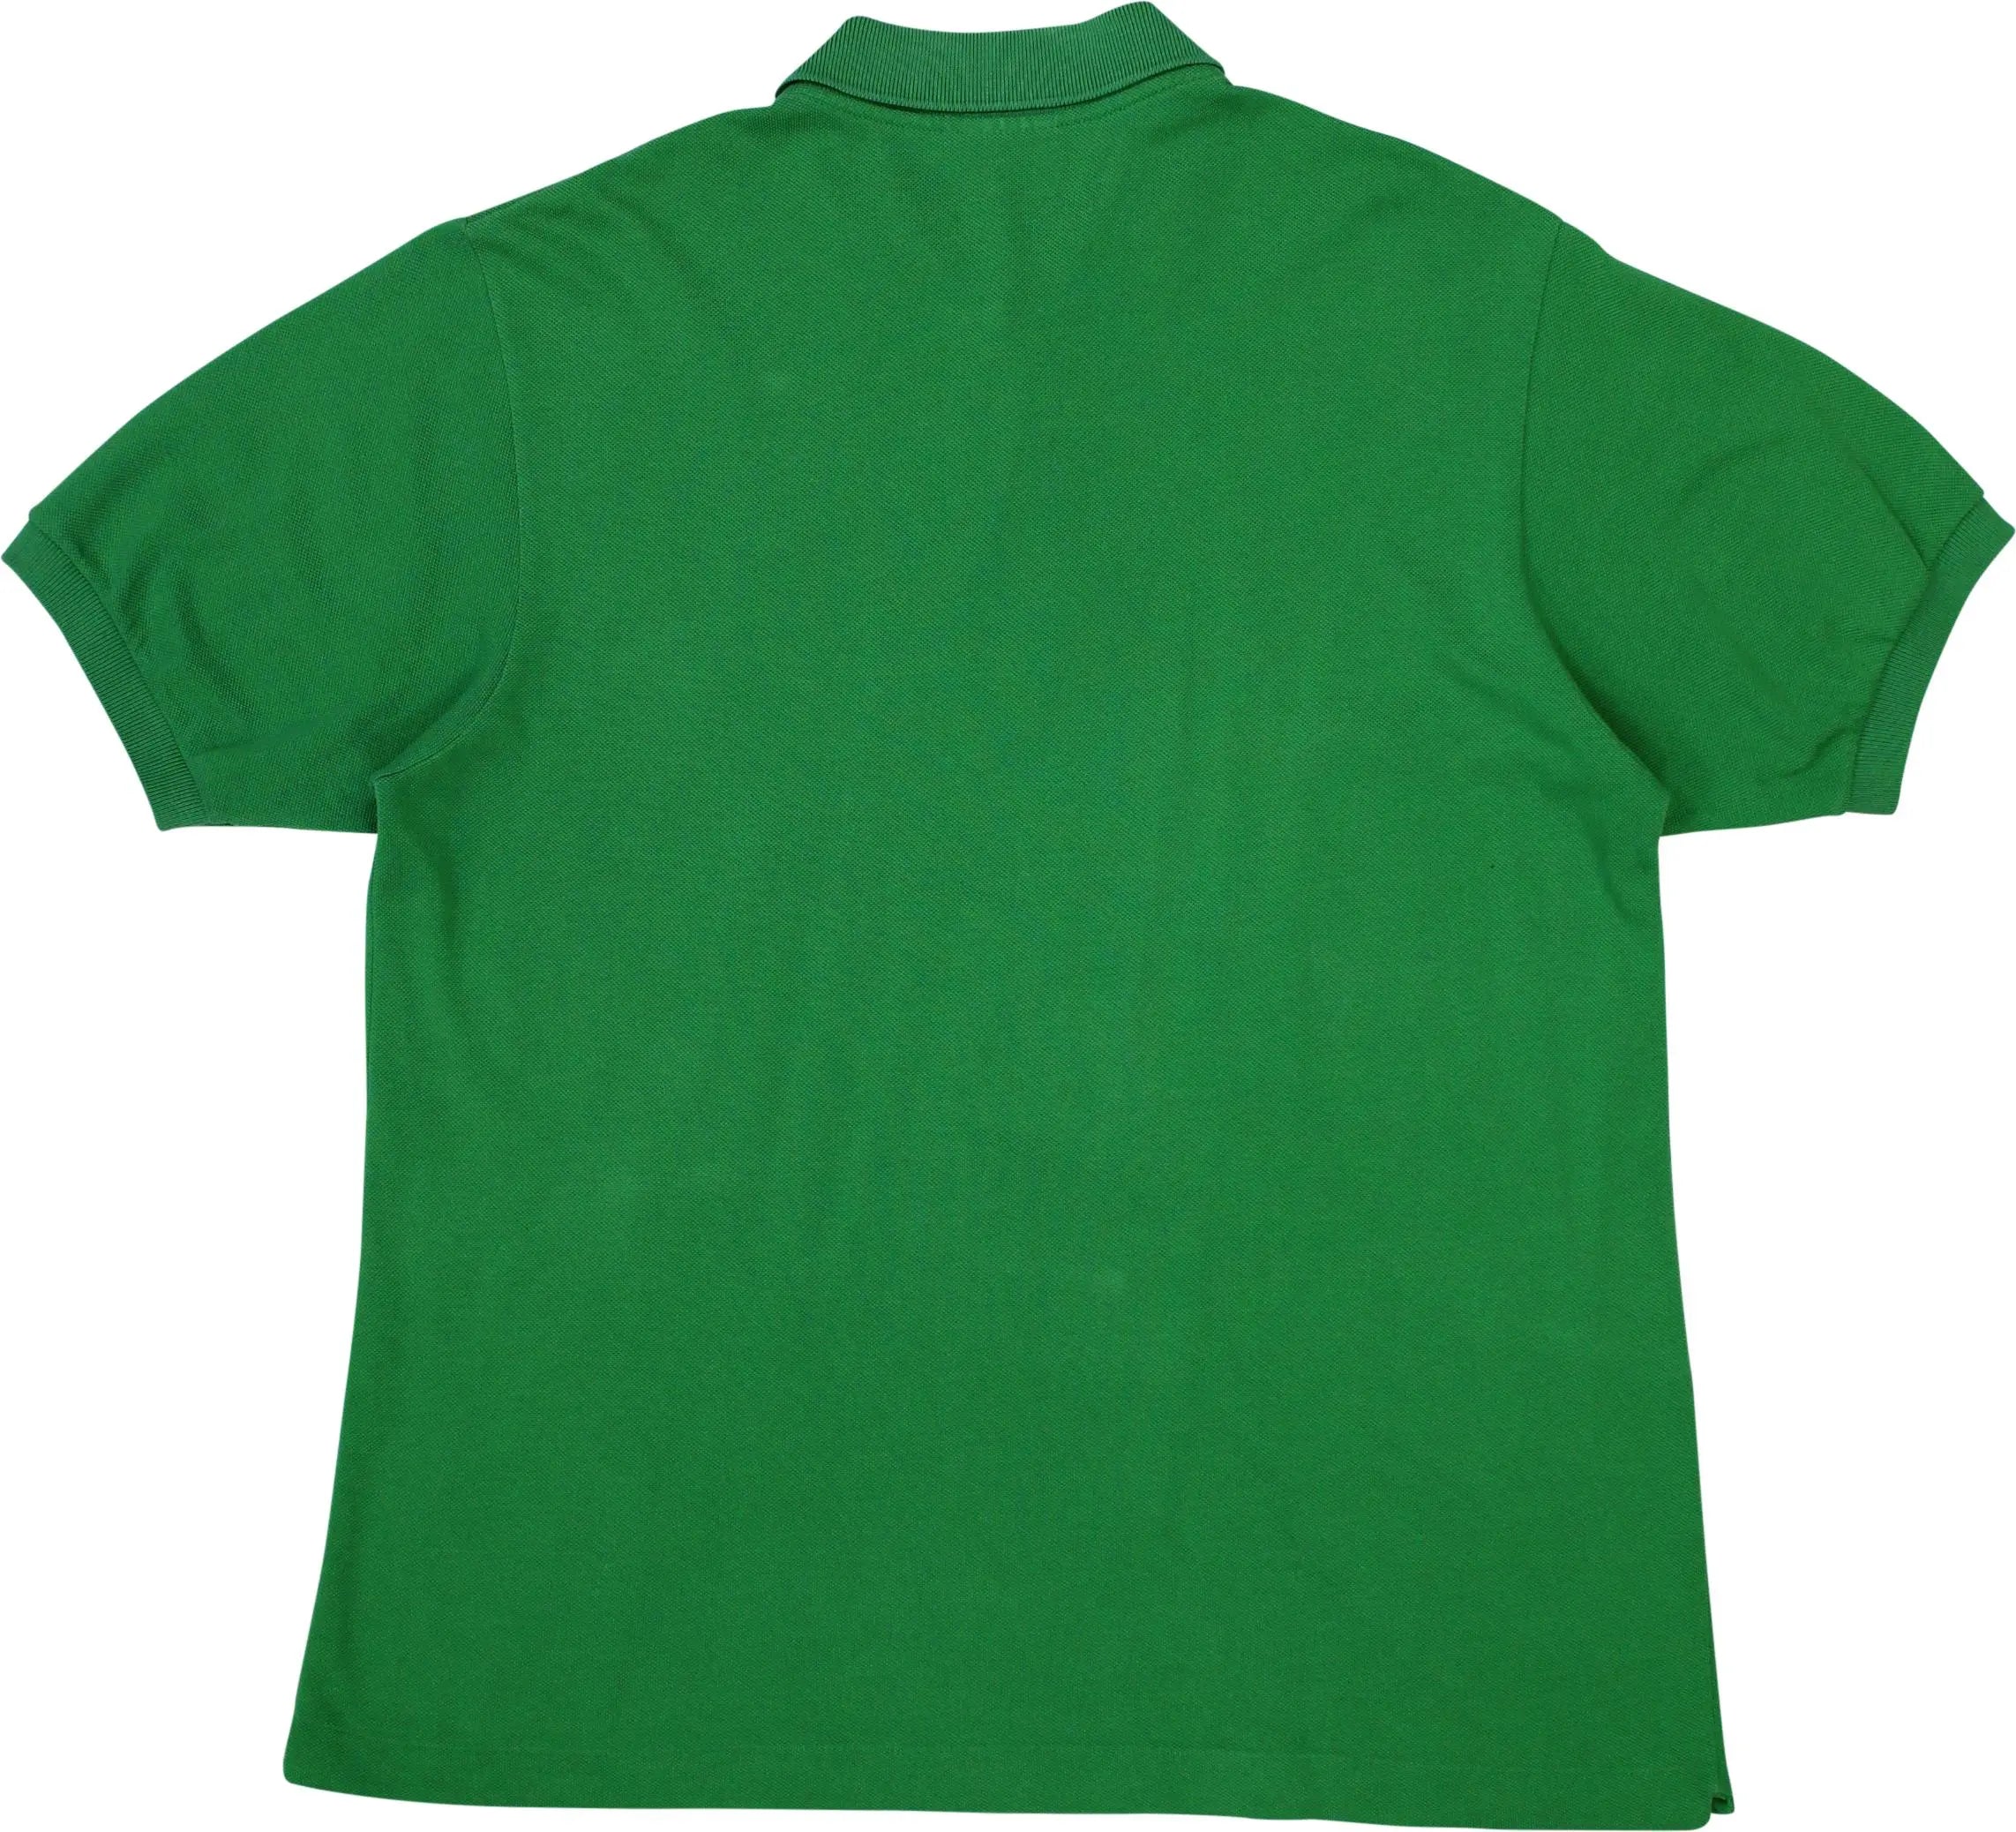 Lacoste - Green Polo By Lacoste- ThriftTale.com - Vintage and second handclothing